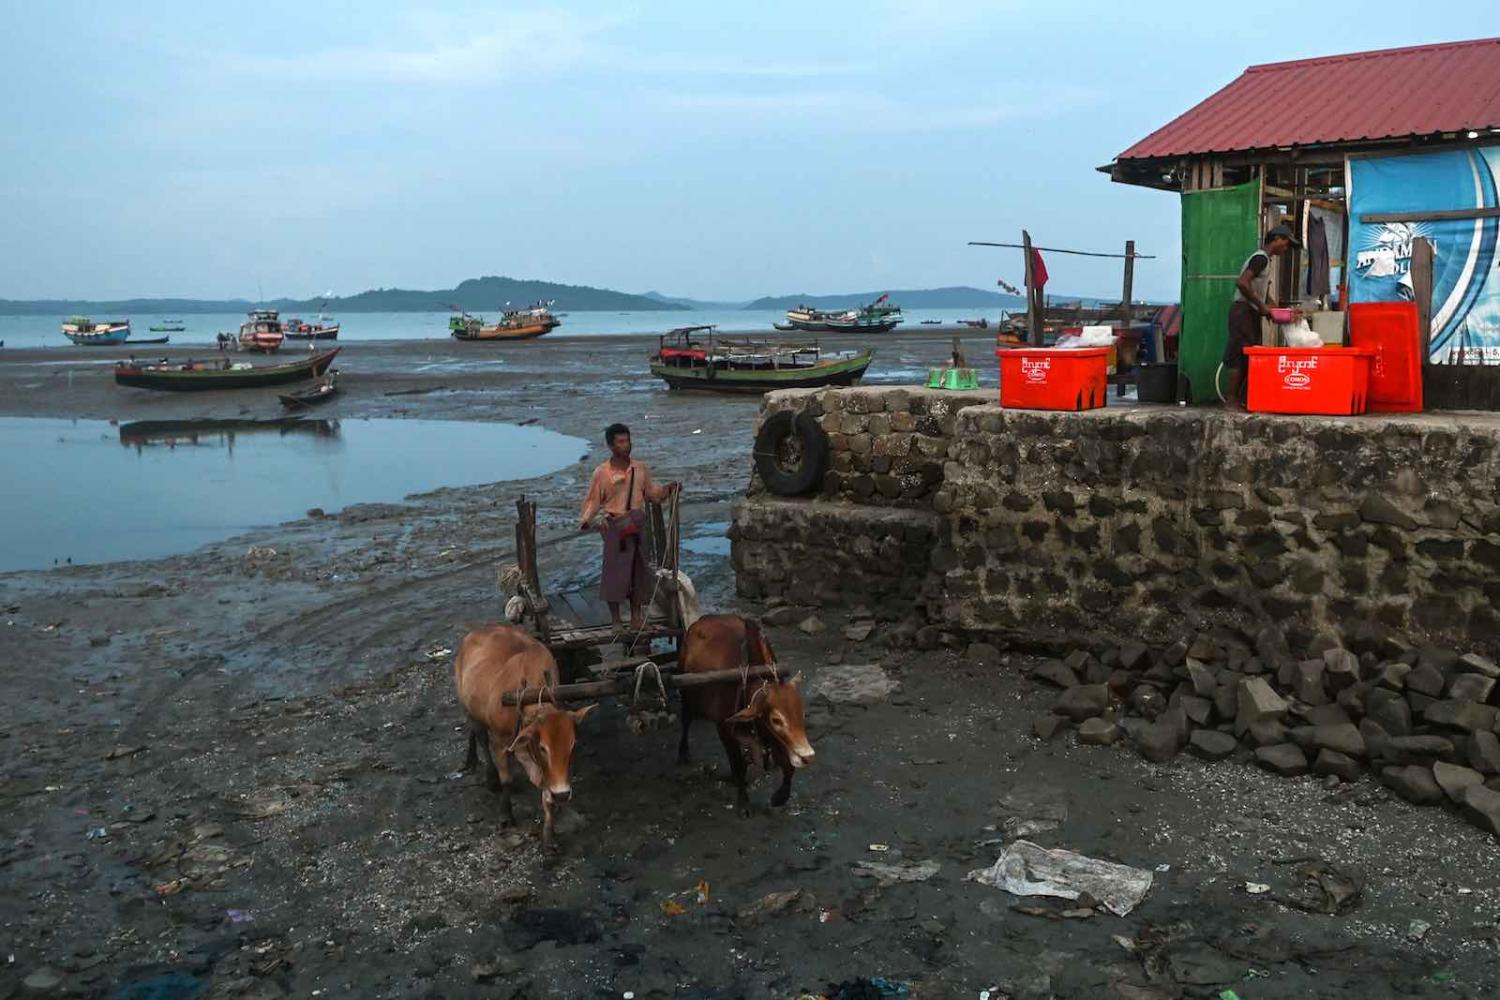 A man transports goods to shore at Japanma jetty in Kyaukphyu, Rakhine state, where China is financing a deep-sea port and a special economic zone, October 2019 (Photo: Ye Aung Thu/AFP via Getty) 